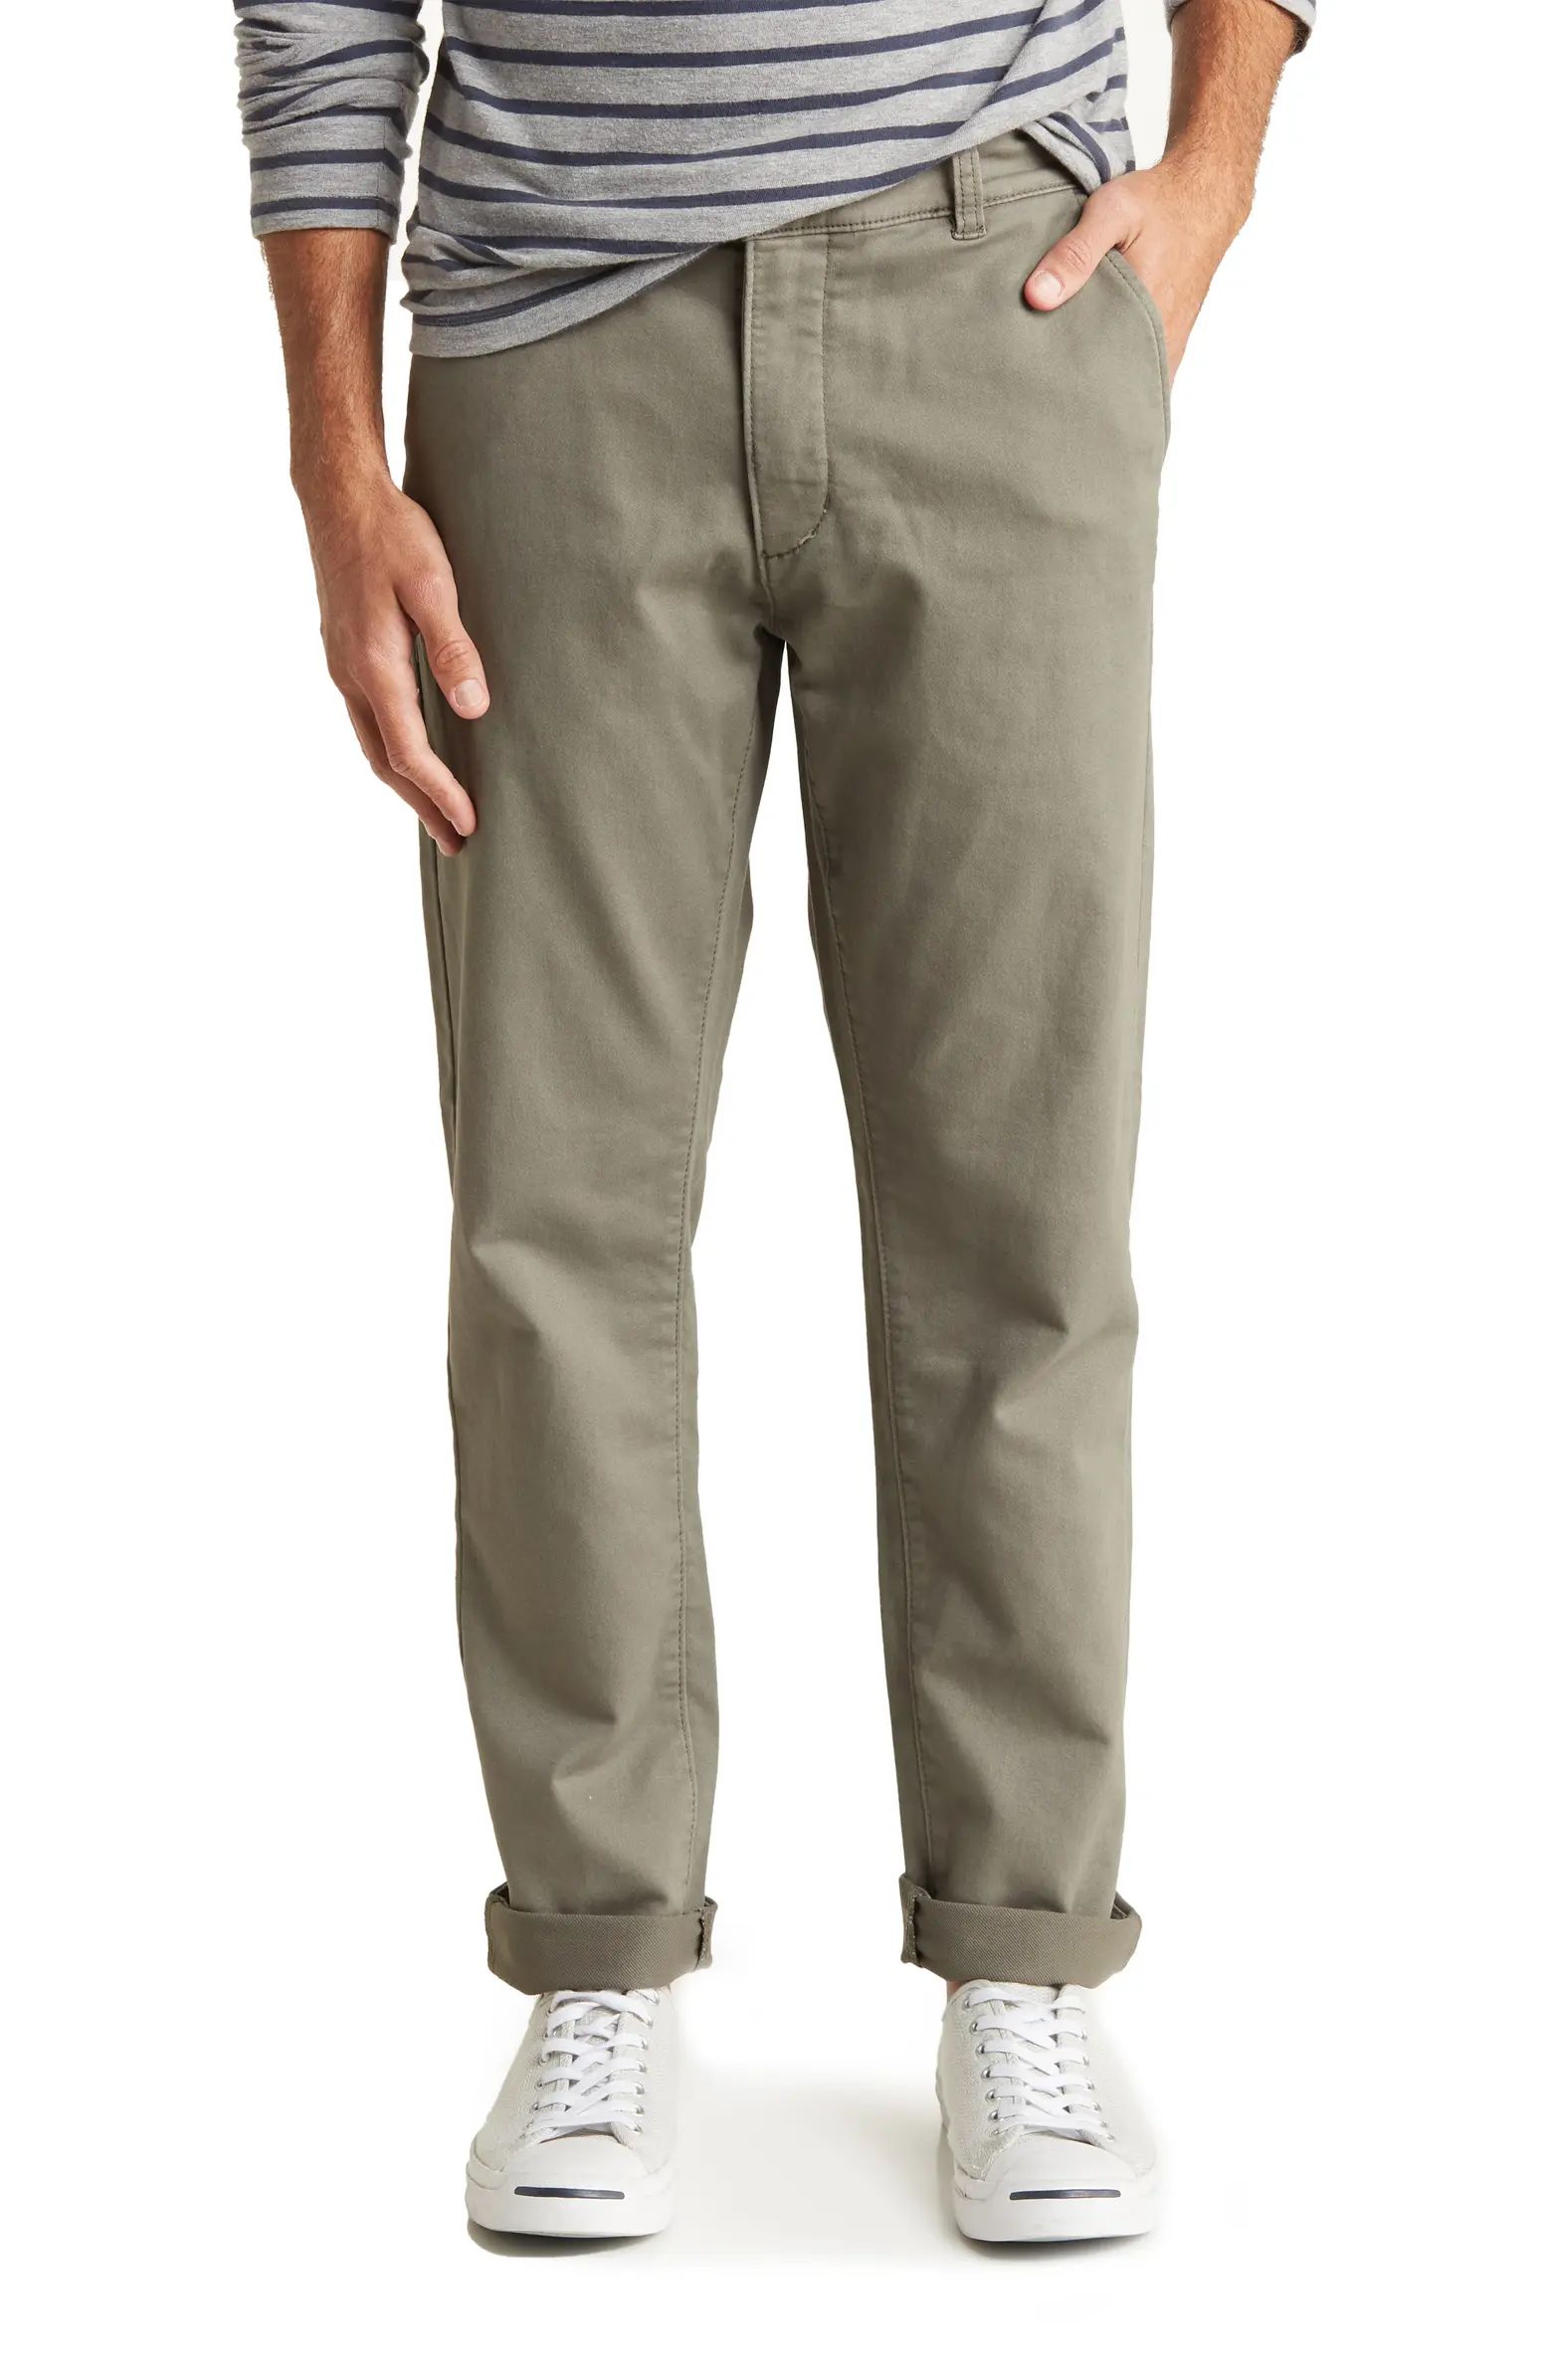 Knit Twill Chino Pants | Nordstrom Rack